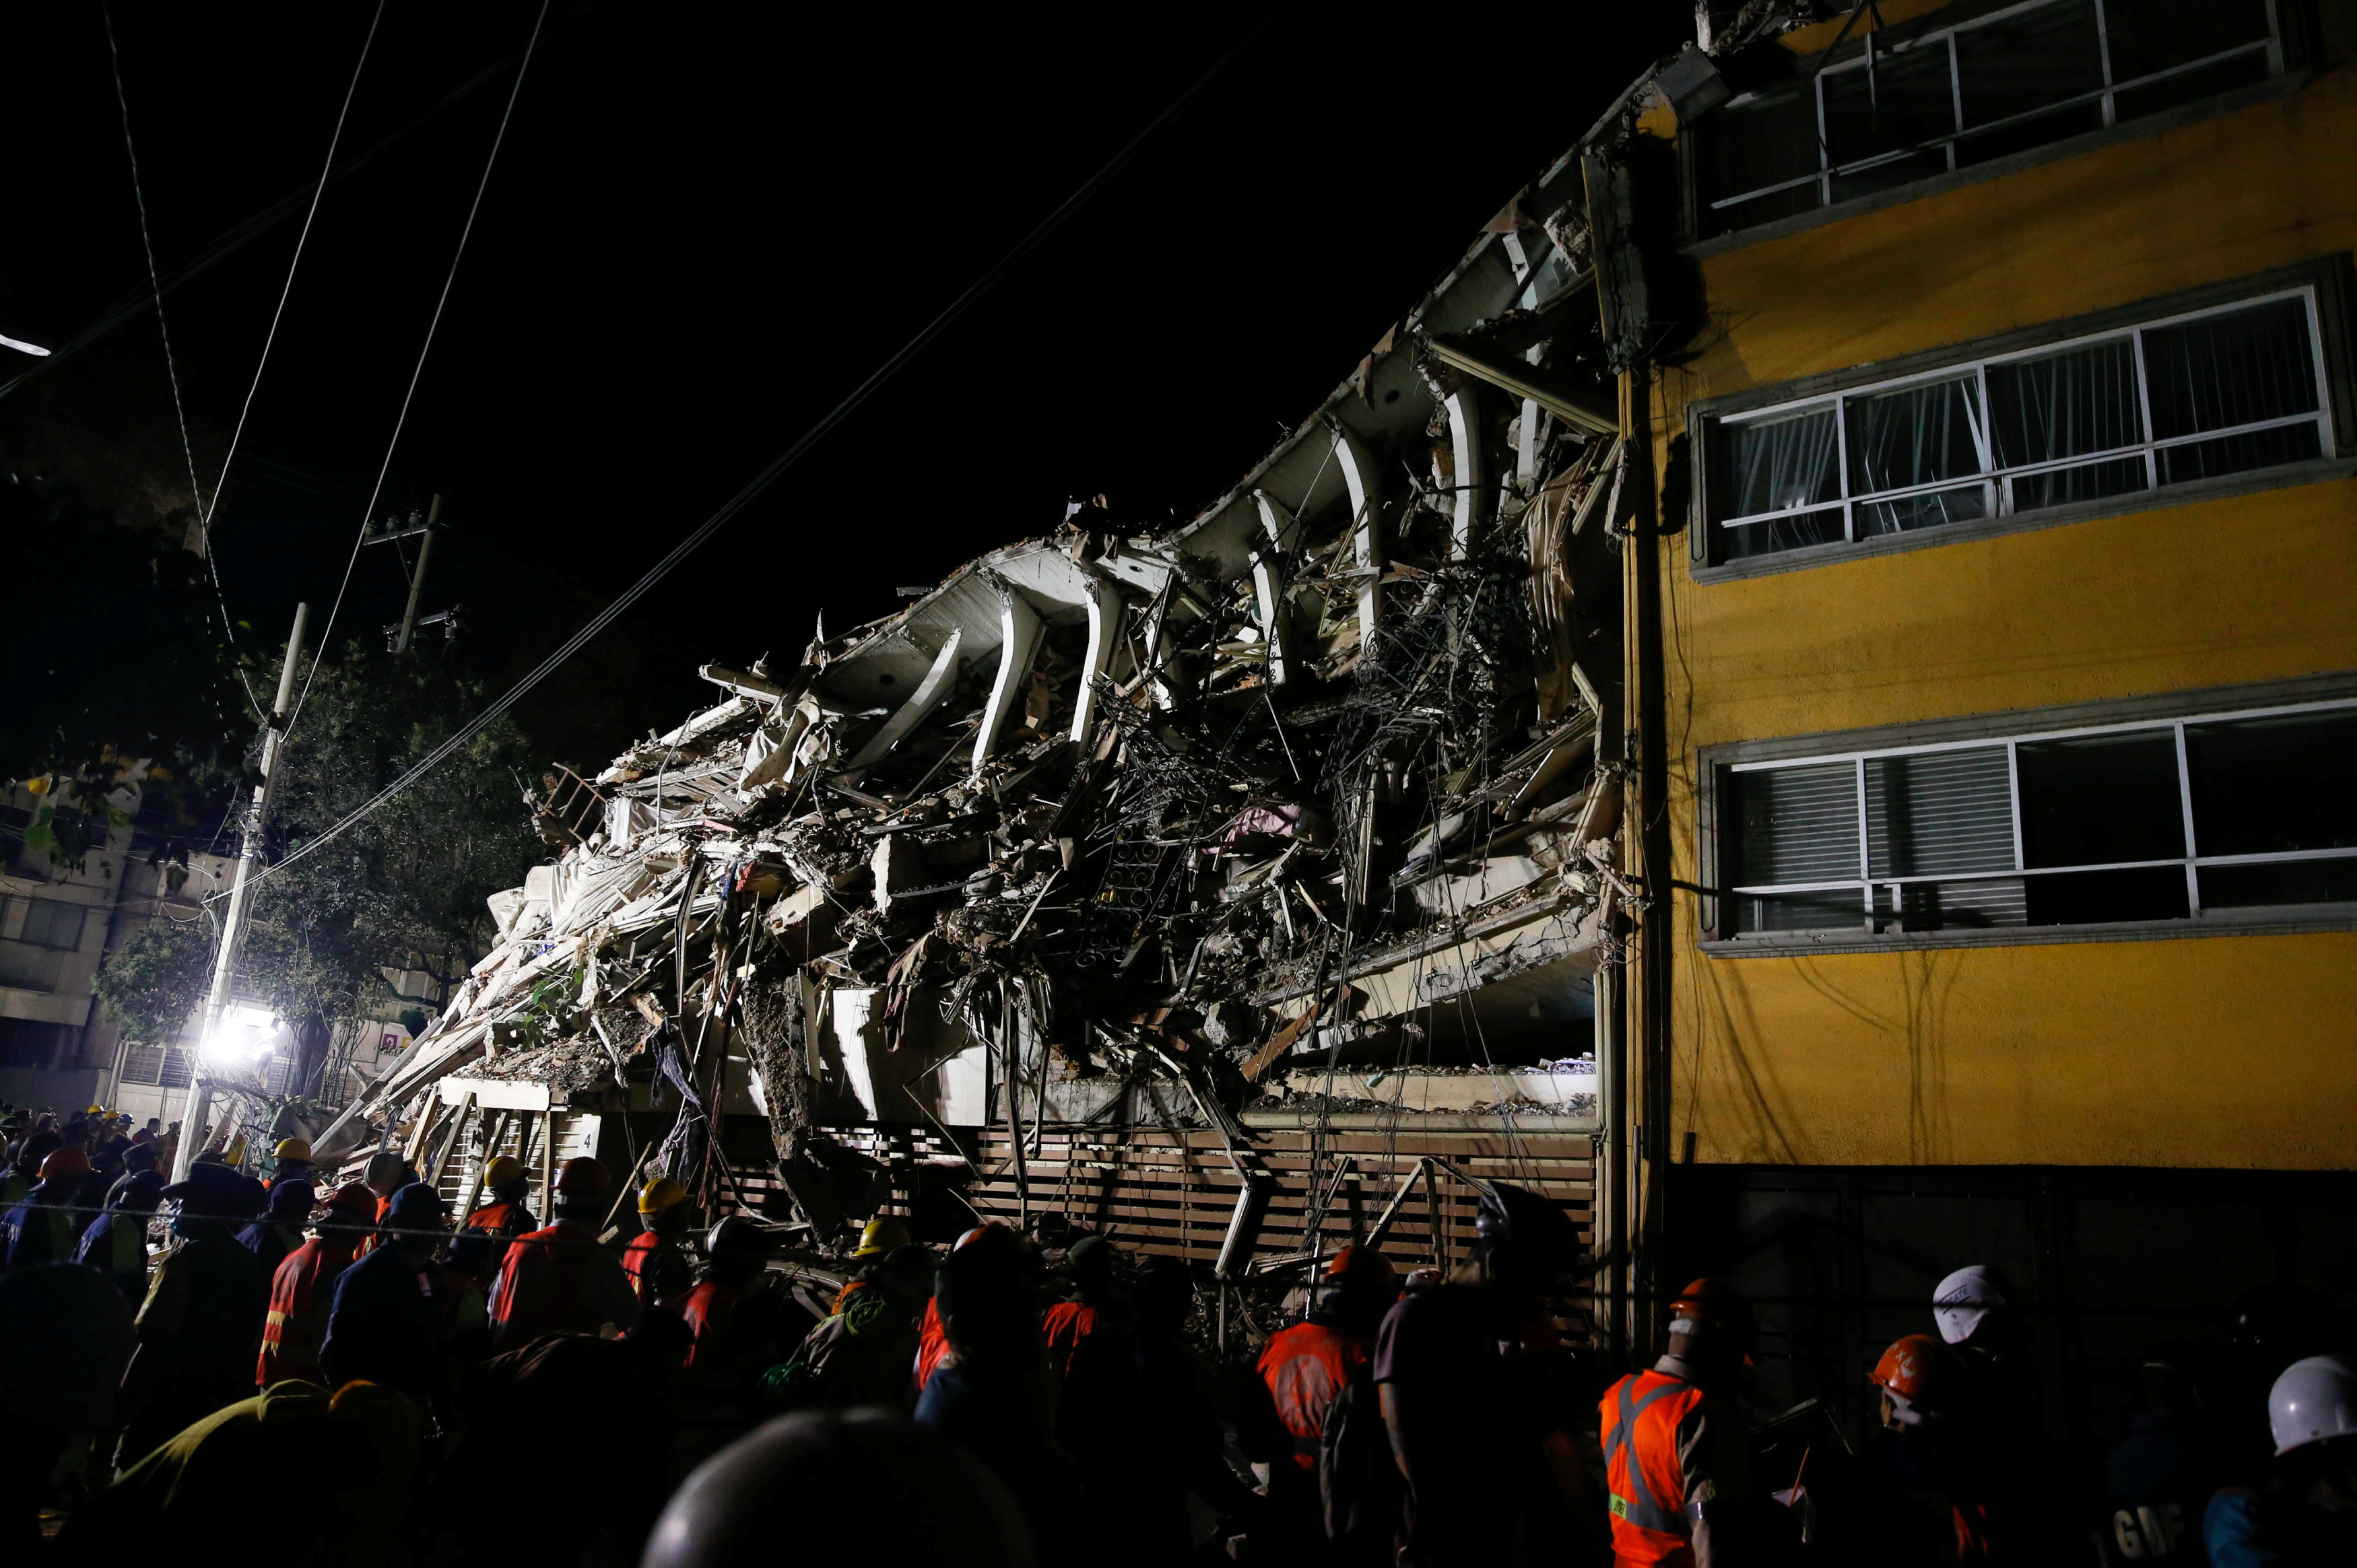 Rescuers work at a the site of a collapsed building after an earthquake in Mexico City, Mexico September 20, 2017. REUTERS/Henry Romero